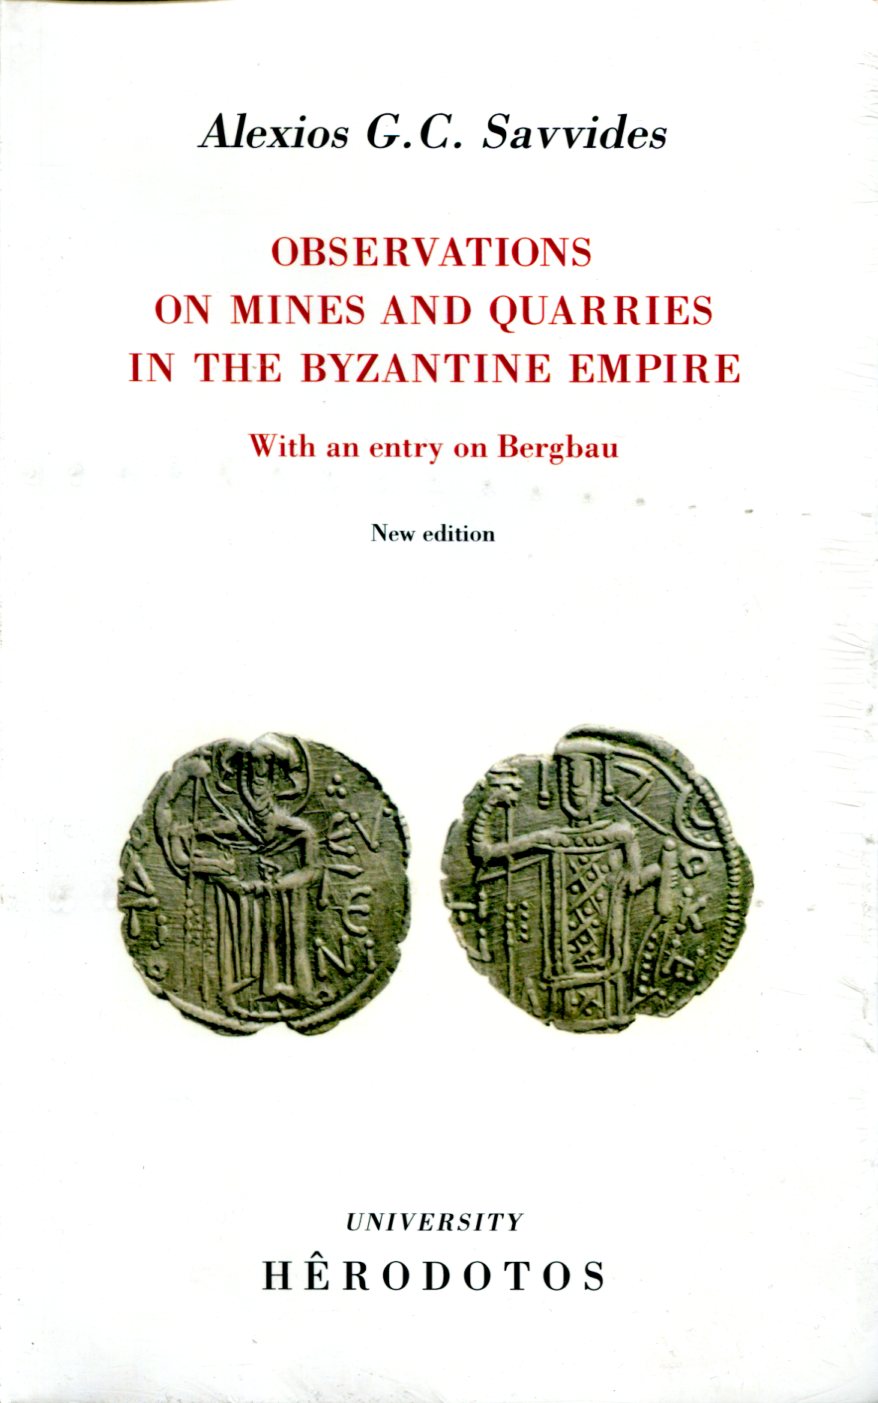 OBSERVATIONS ON MINES AND QUARRIES IN THE BYZANTINE EMPIRE